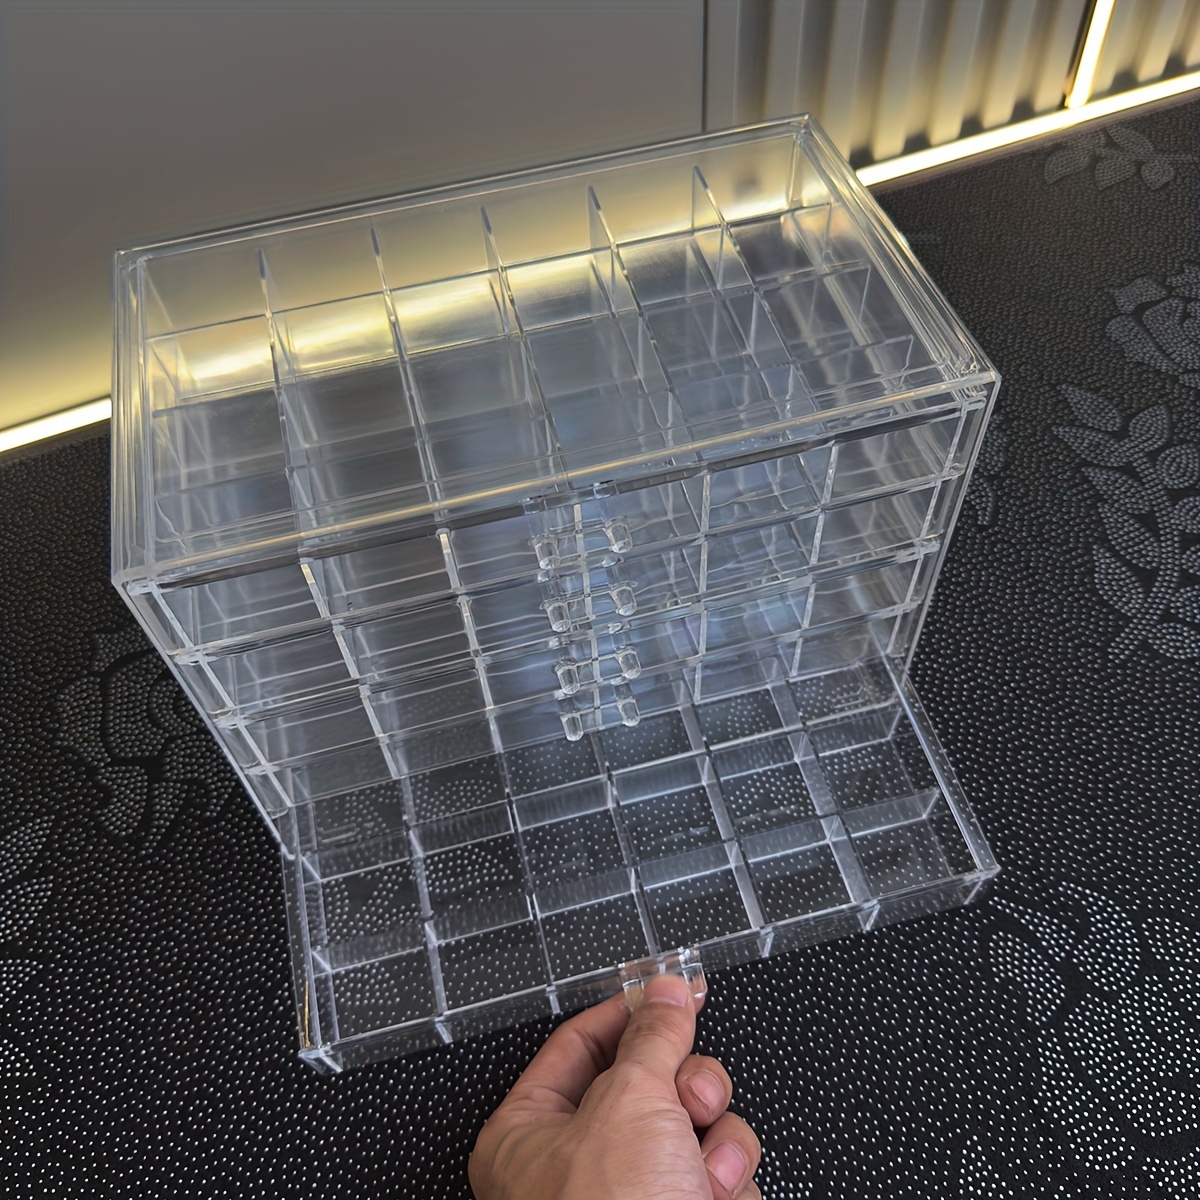 

1pc Large Capacity Multi-layer Jewelry Storage Box, Dust-proof Household Popular Jewelry Box, Anti-oxidation Earrings Storage Container